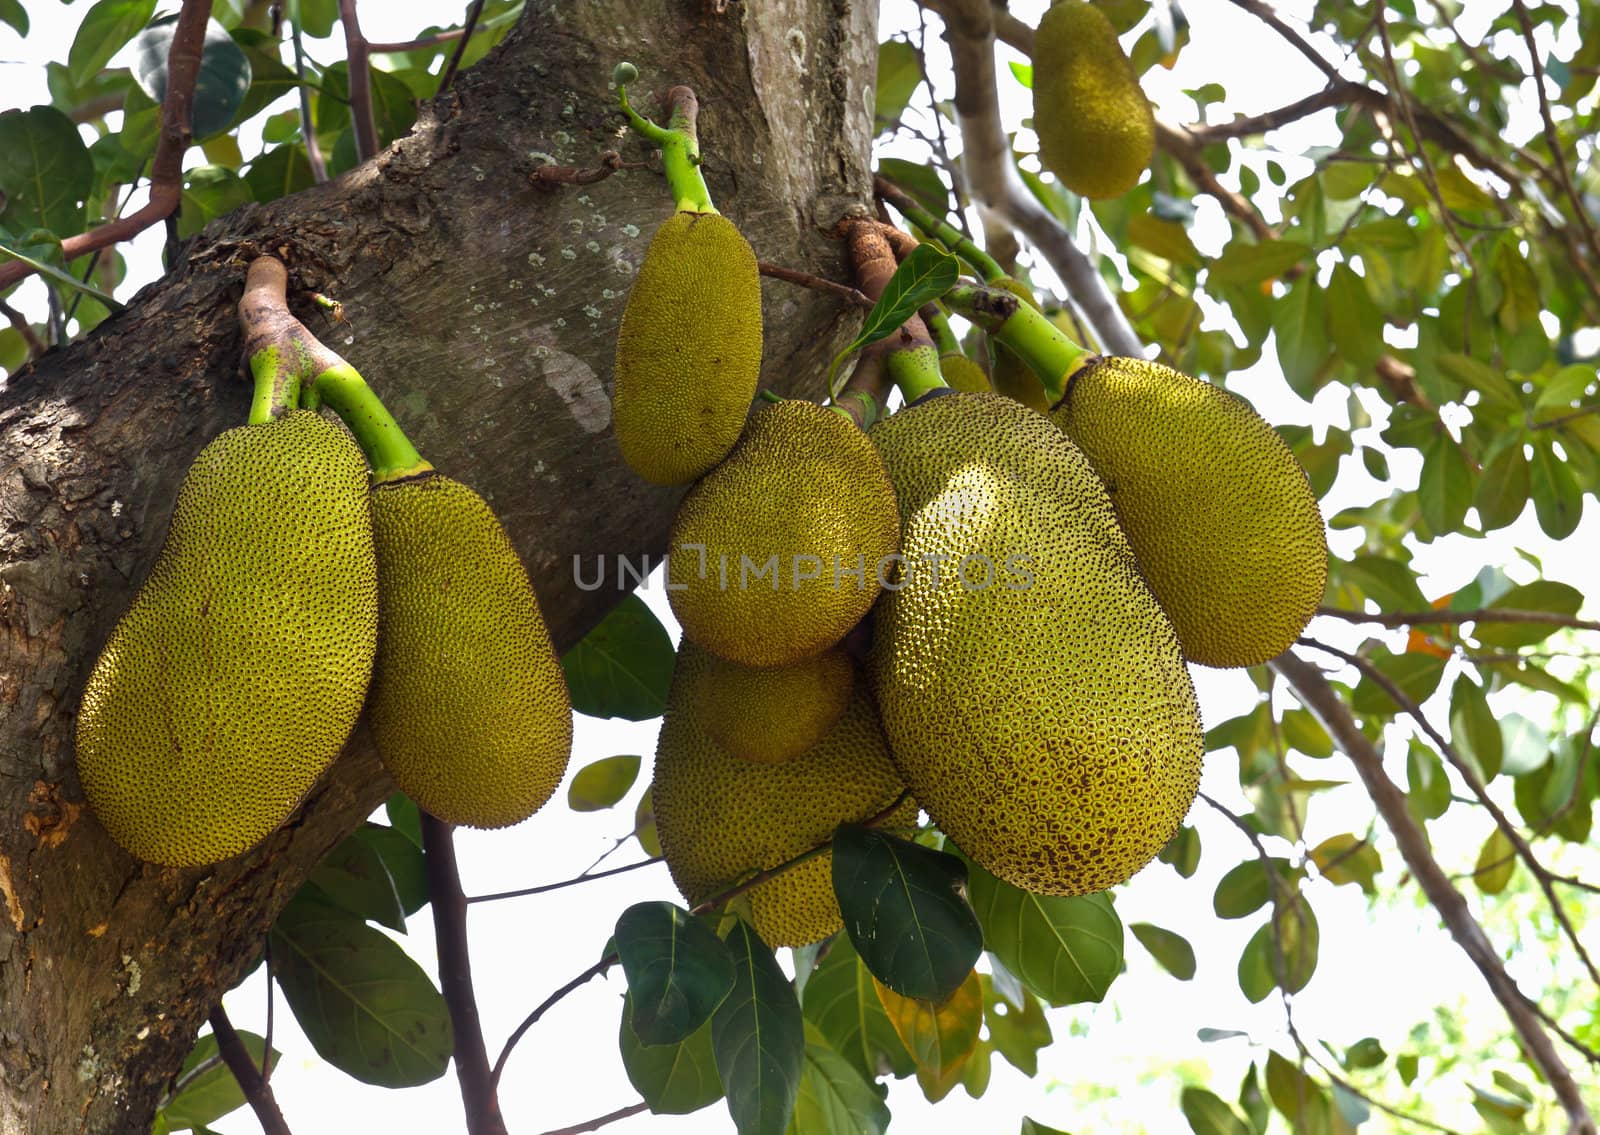 Jack Fruit hanging on the tree in Thailand